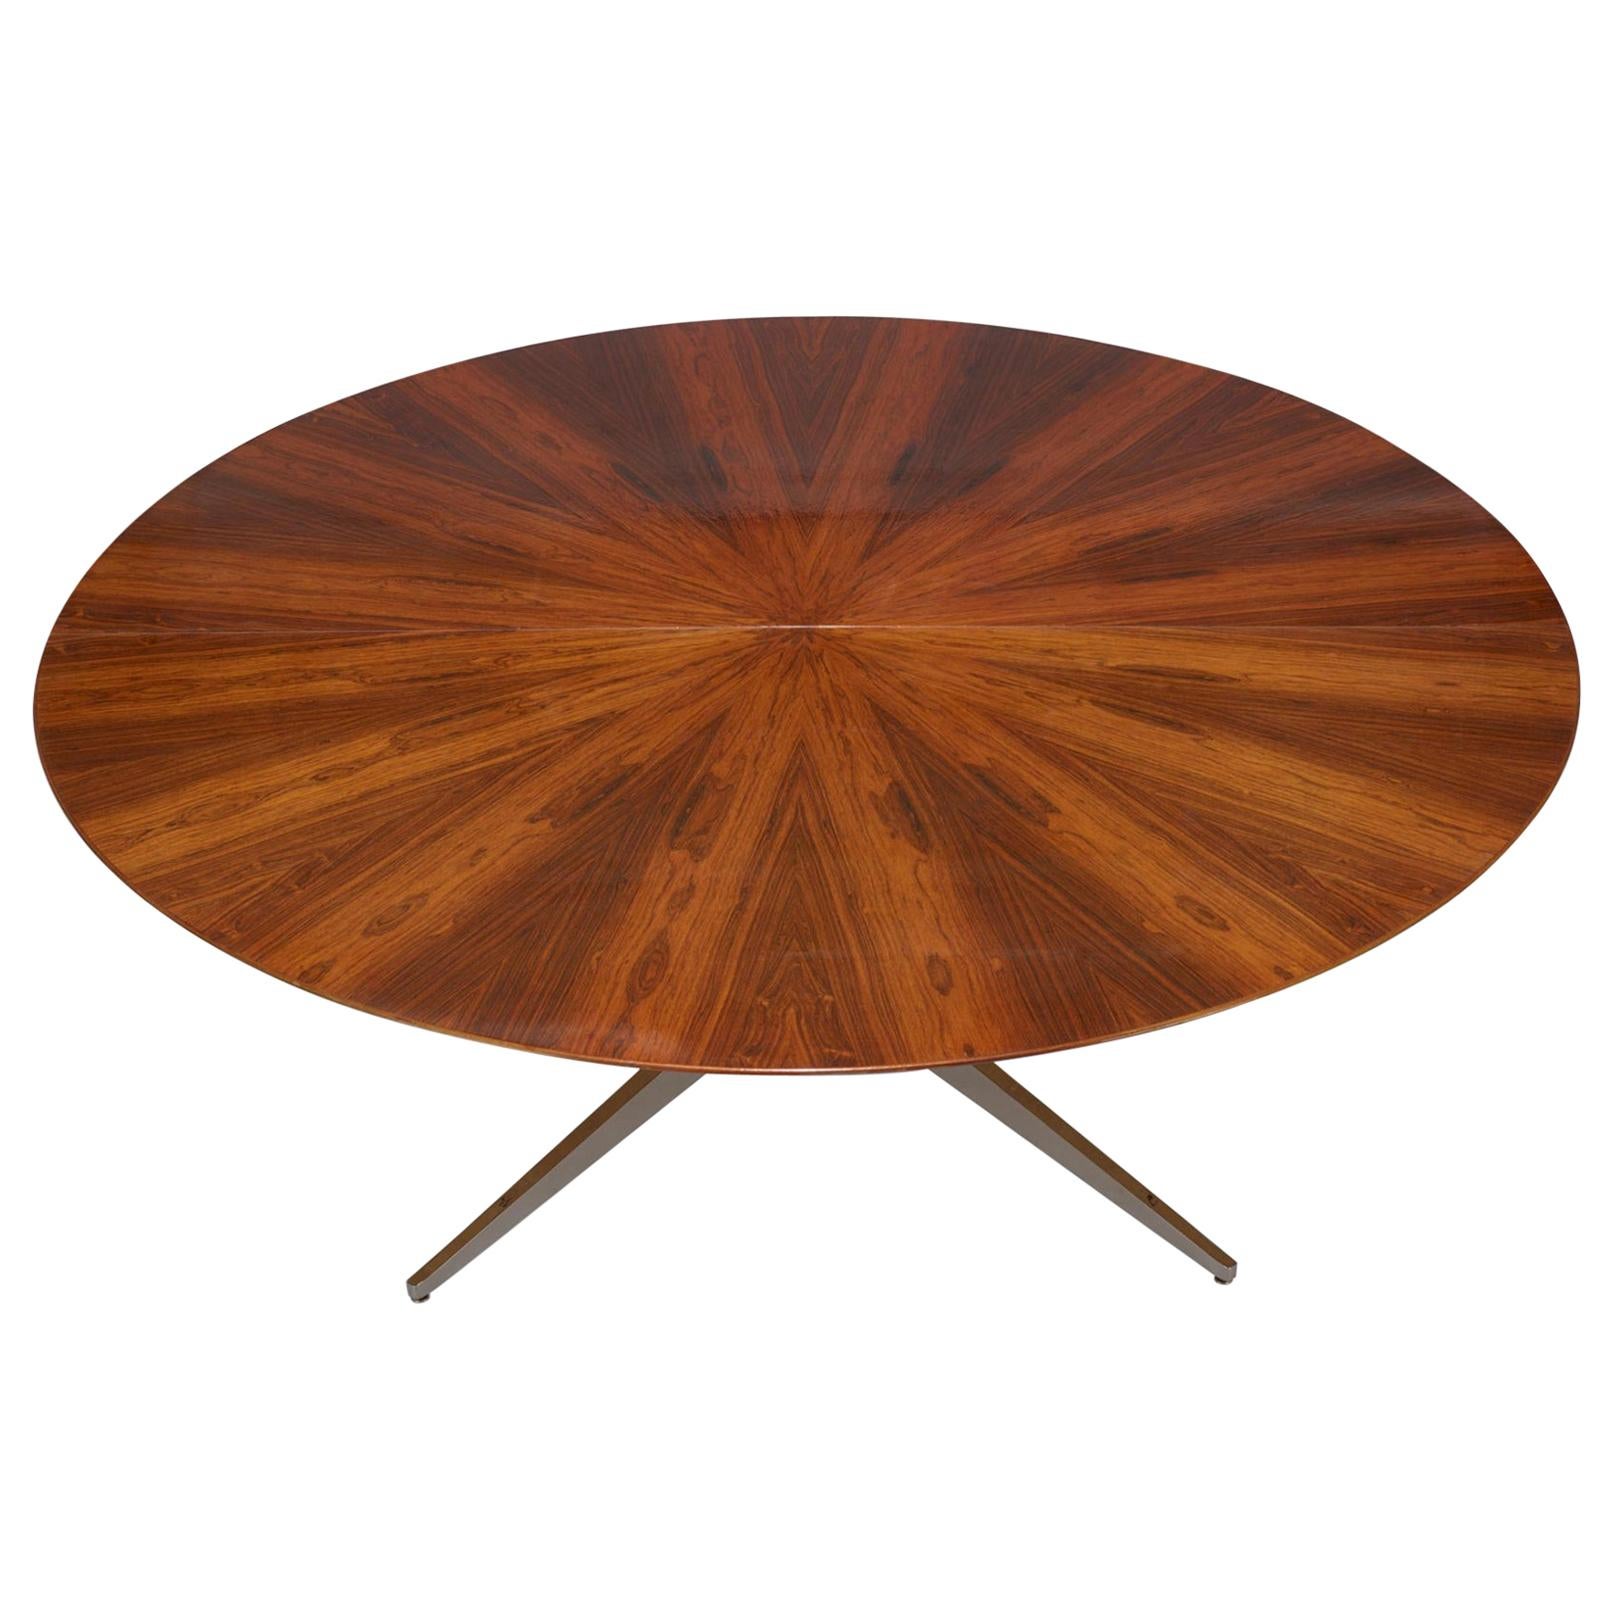 84" Round Rosewood Table by Florence Knoll for Knoll International 1960s, Signed